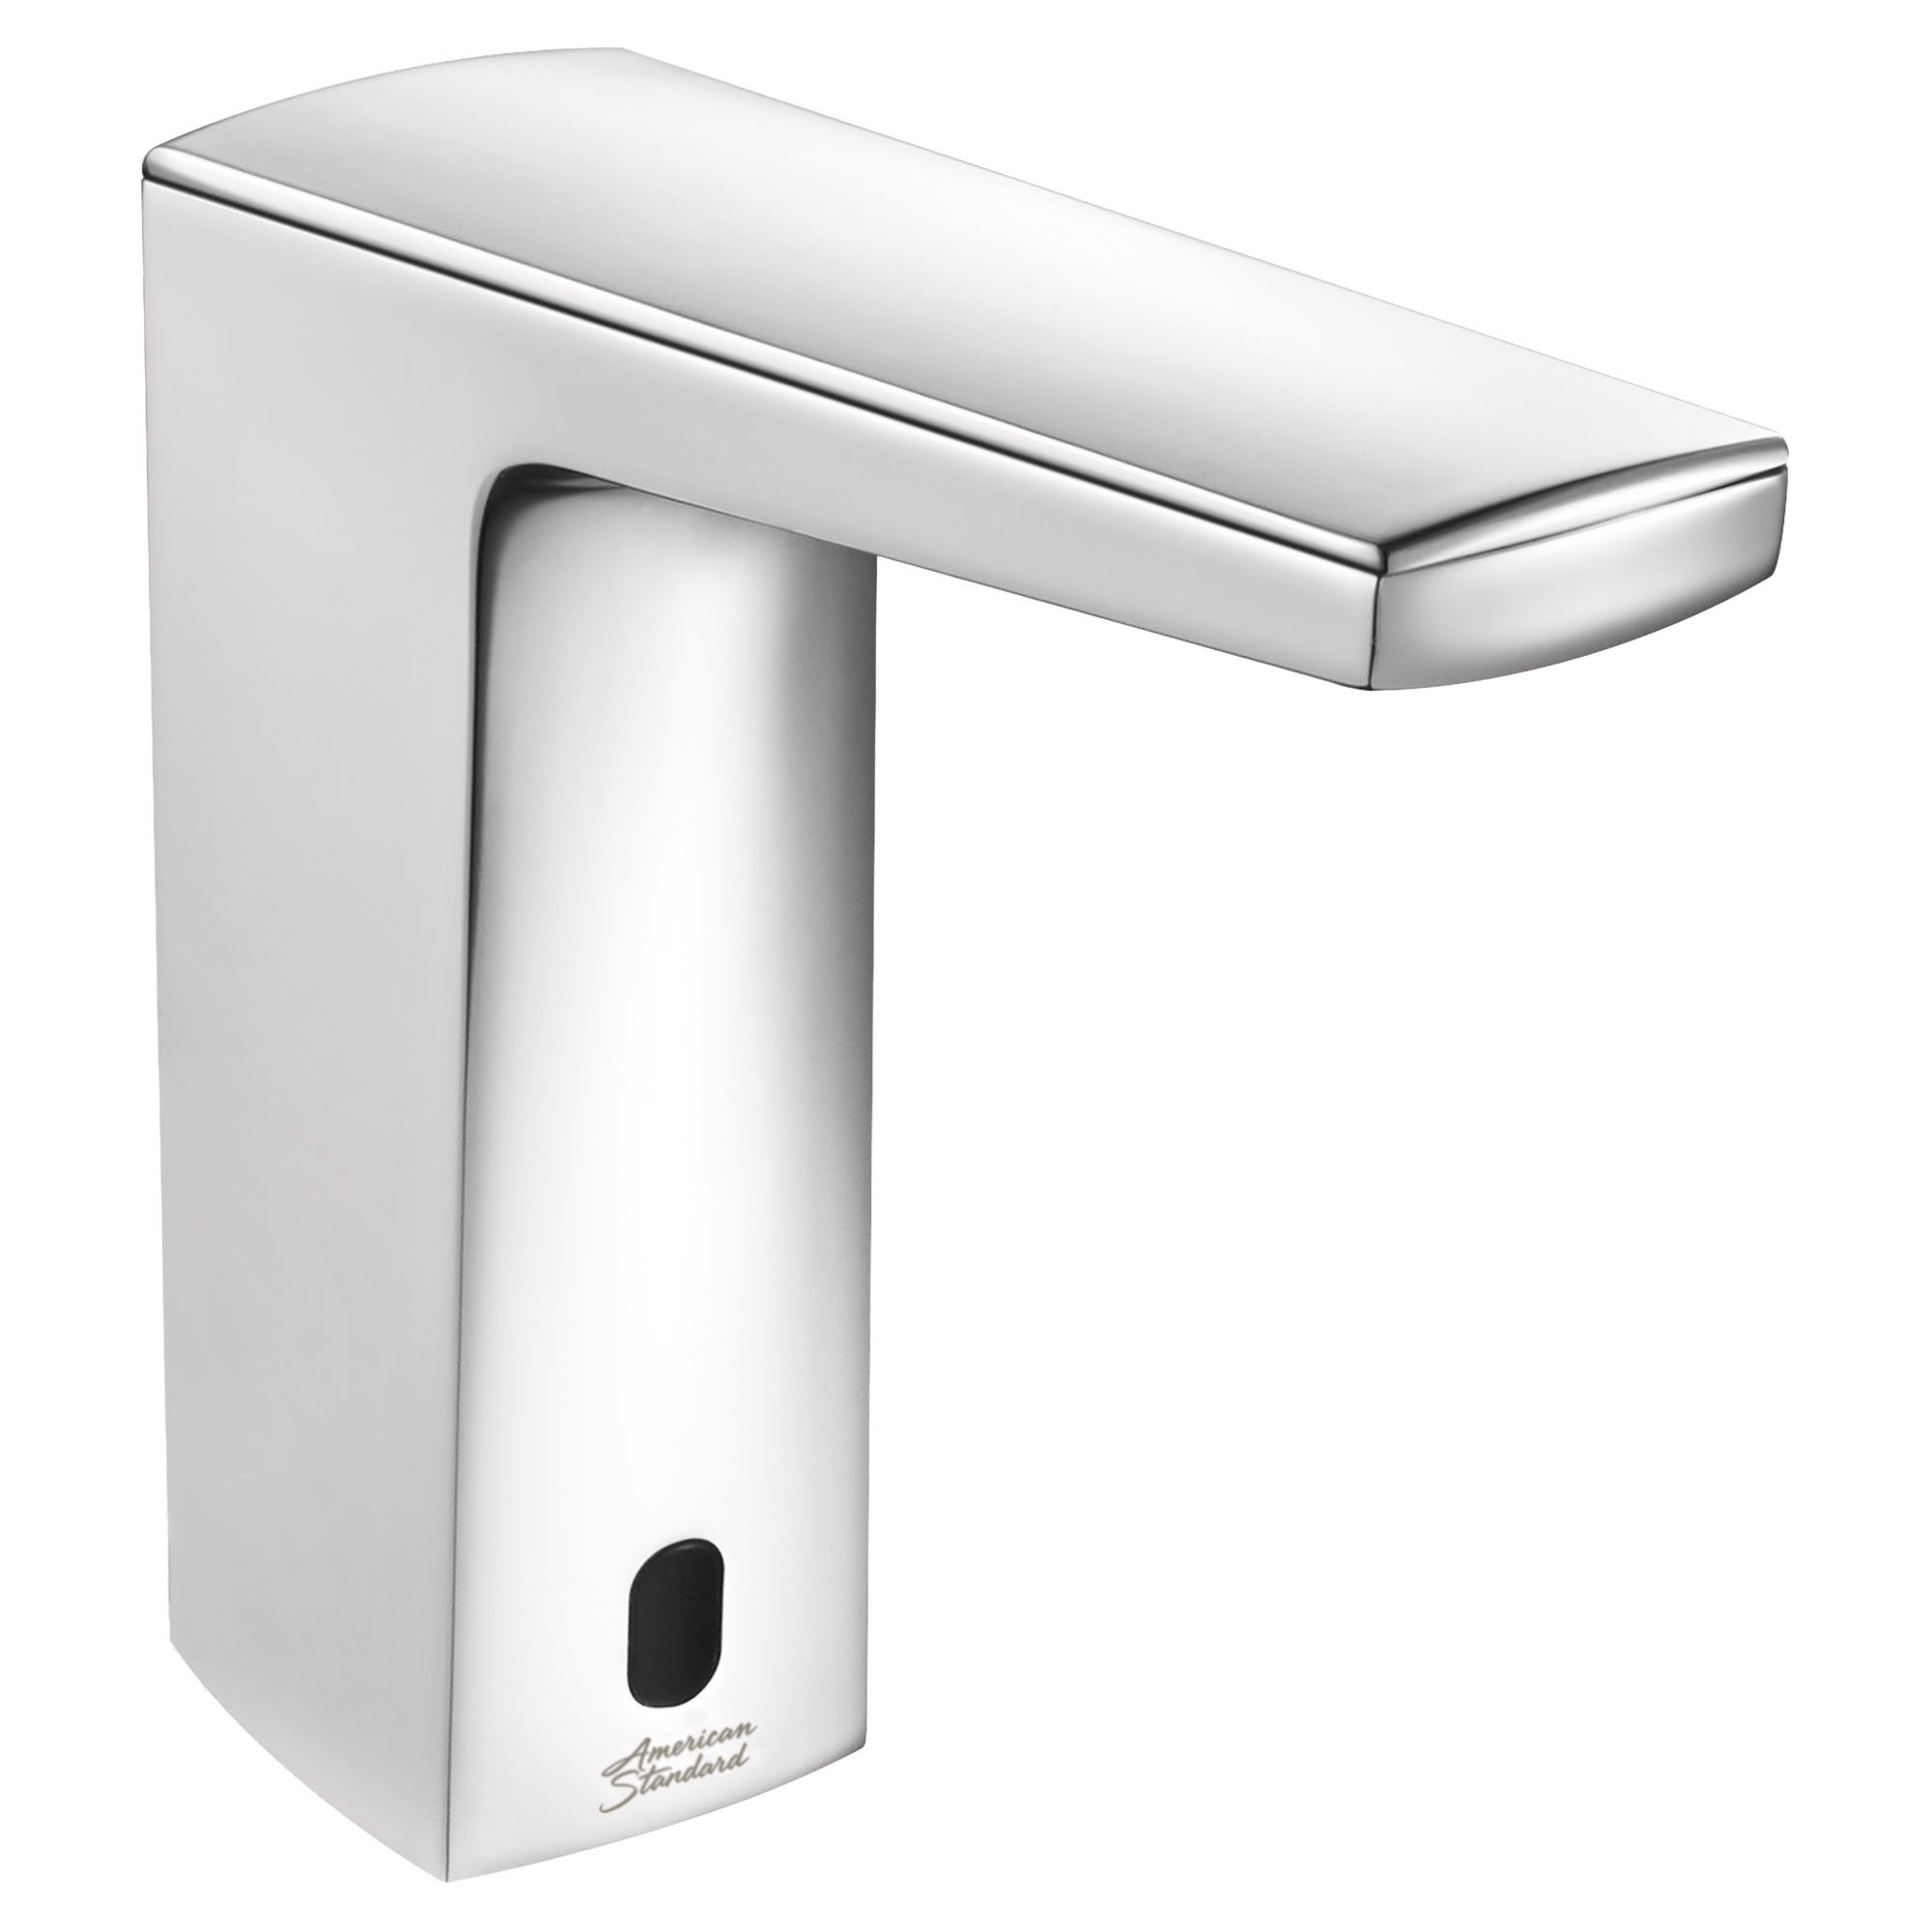 Paradigm™ Selectronic™ Touchless Faucet, Base Model With Above-Deck Mixing, 0.5 gpm/1.9 Lpm